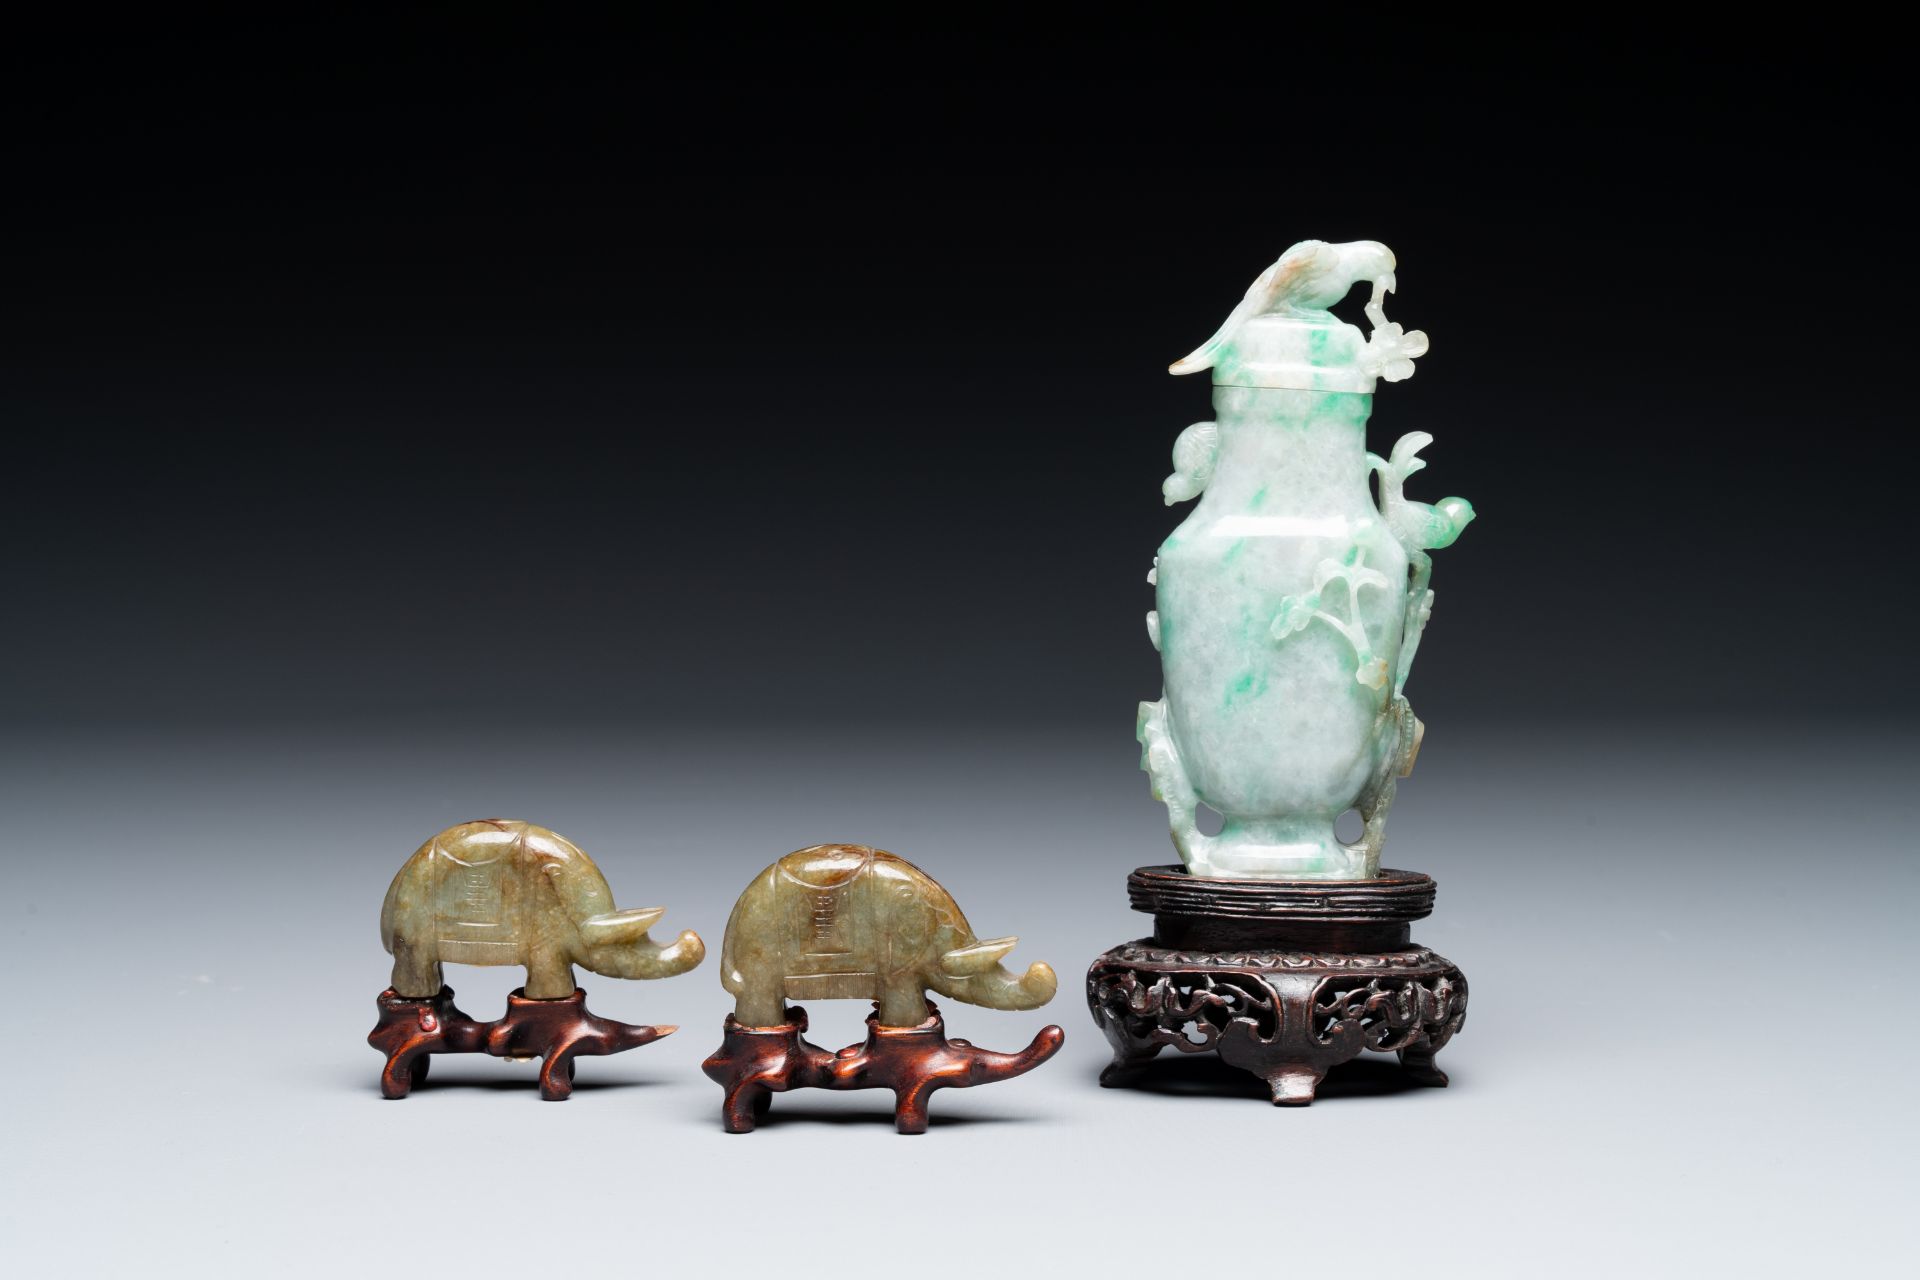 A pair of Chinese jade sculptures of elephants and a lidded vase on wooden stands, 19th C. - Image 2 of 5